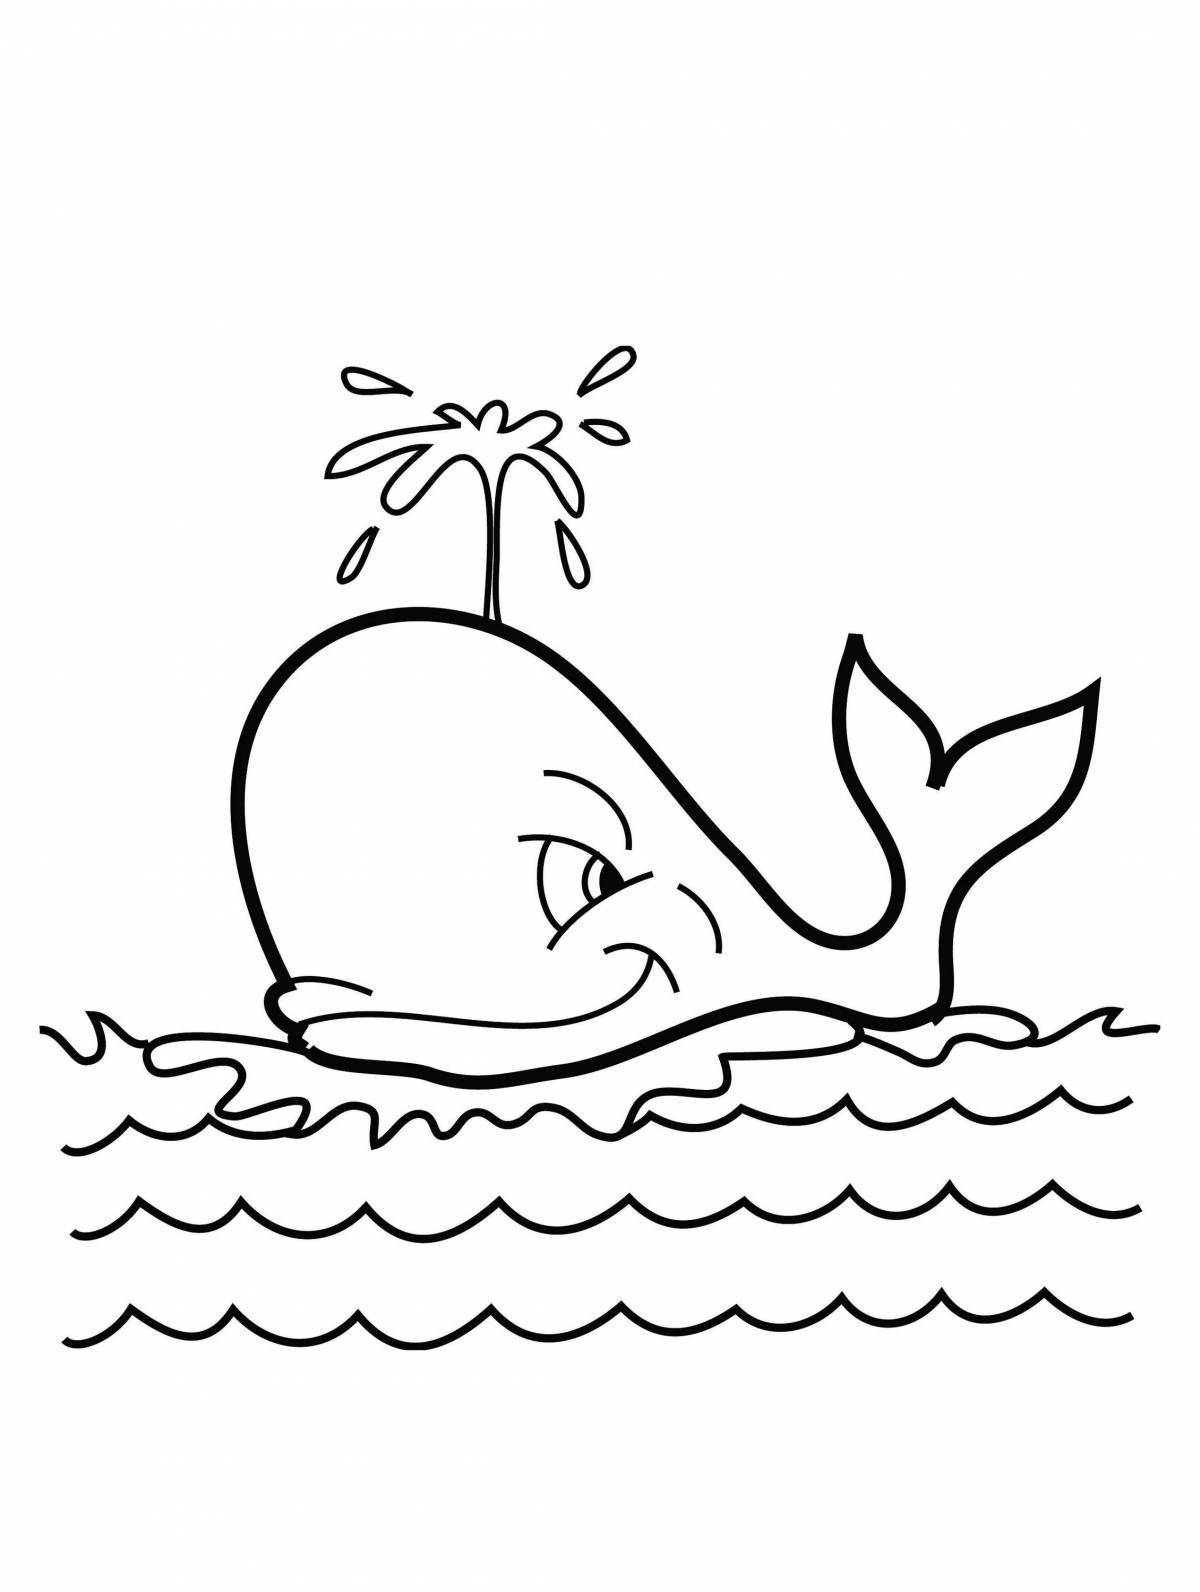 Joyful coloring drawing of a whale